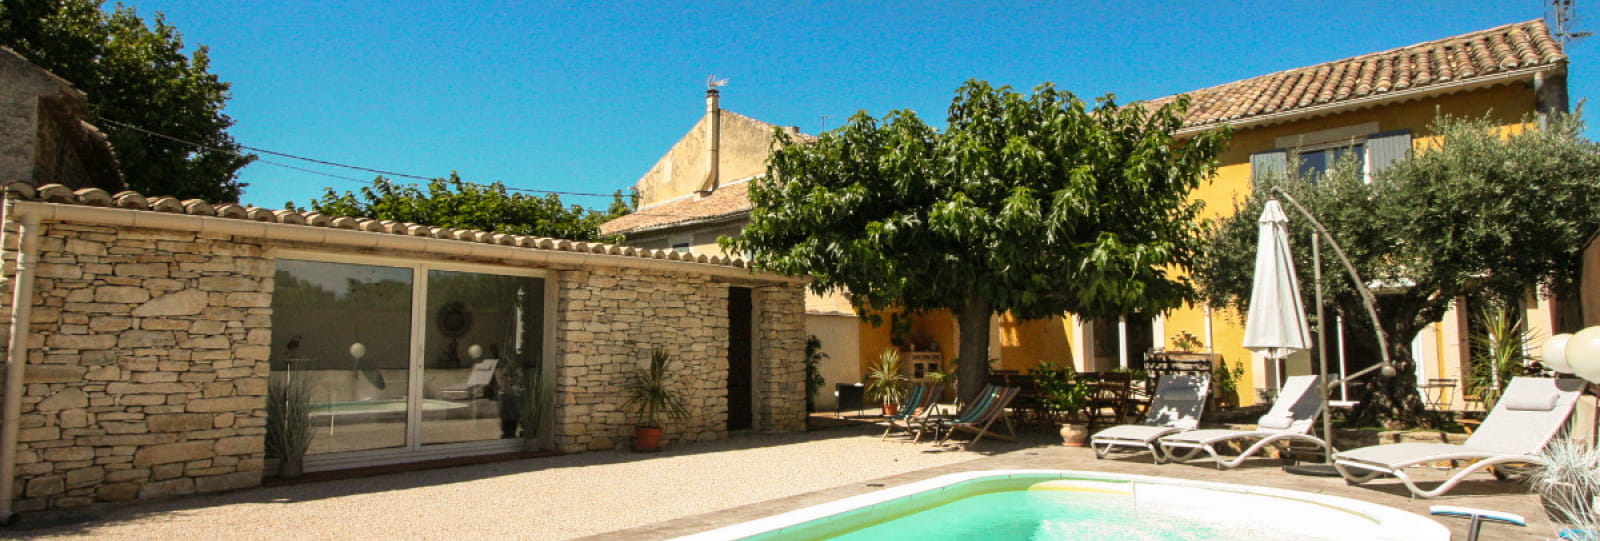 Village house for seasonal rental with private pool in Suze la Rousse, enclosed garden, close to shops